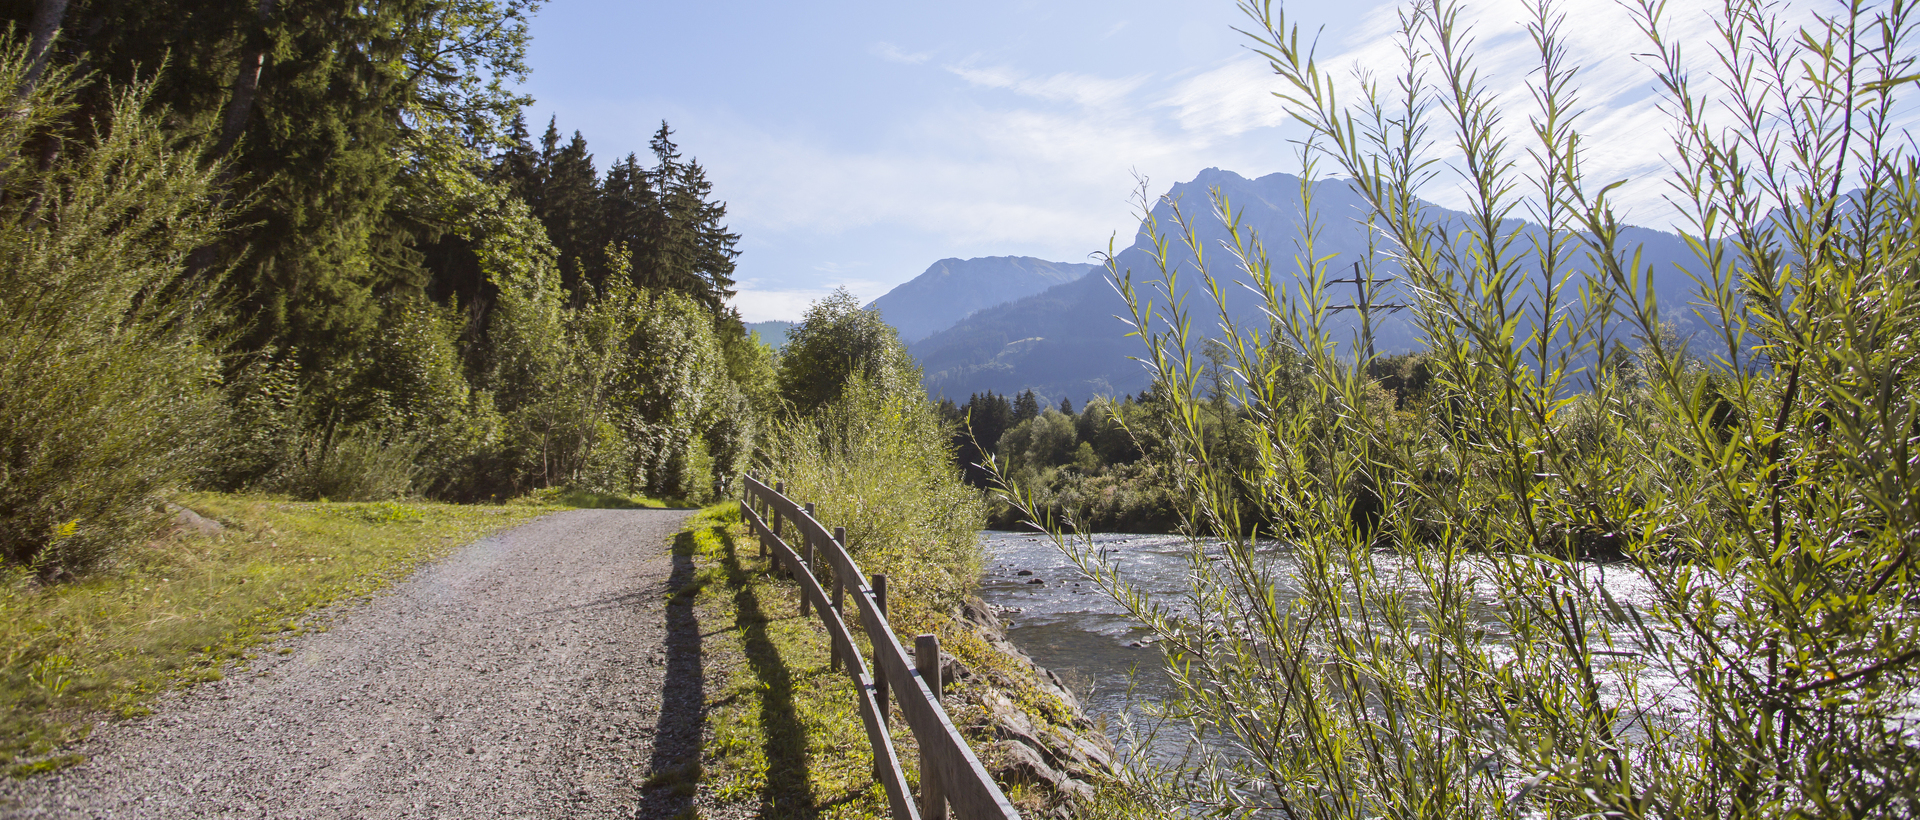 A cycle path by the River Iller, mountains in the background